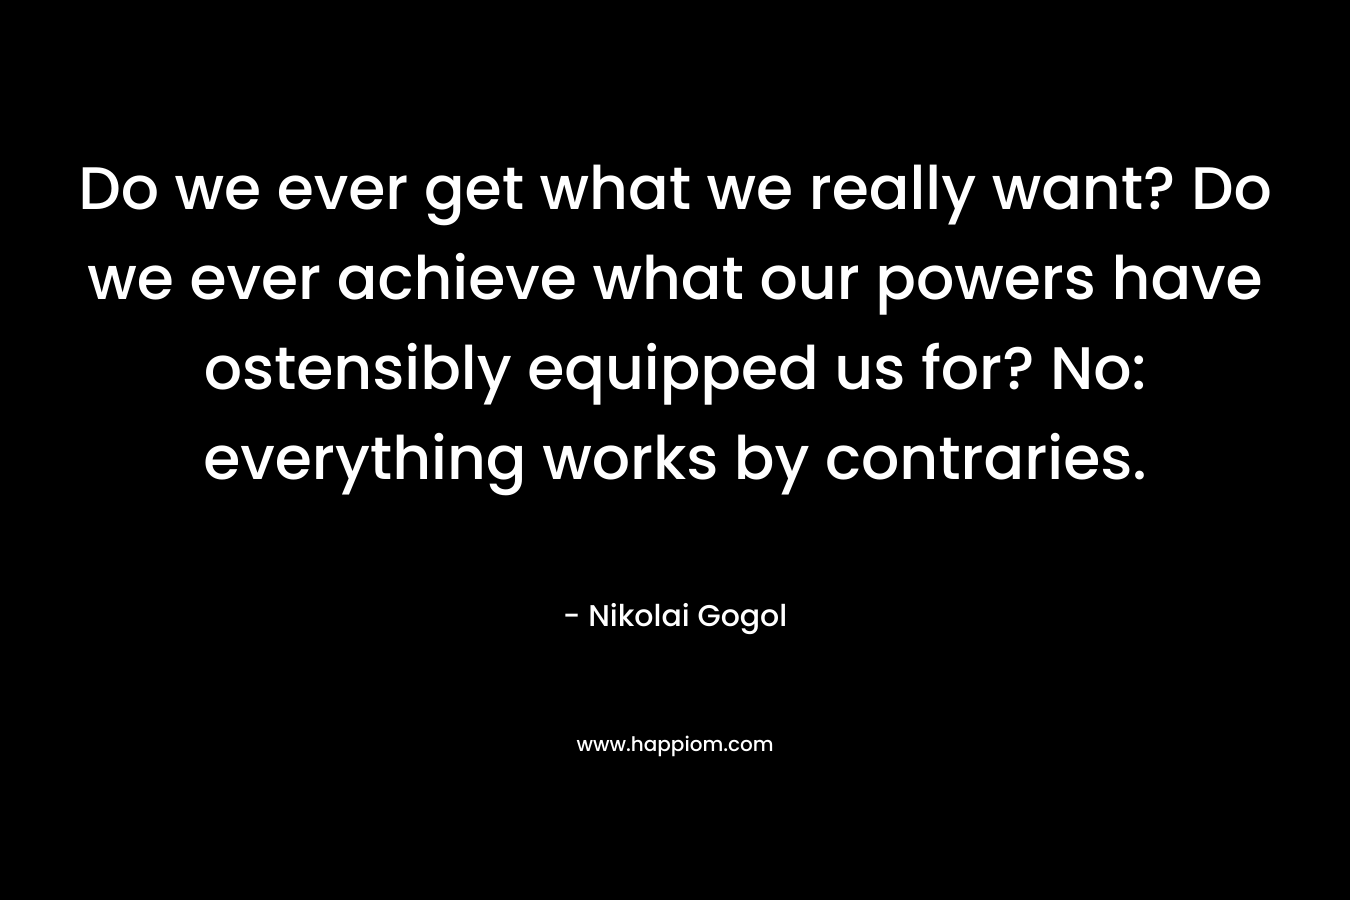 Do we ever get what we really want? Do we ever achieve what our powers have ostensibly equipped us for? No: everything works by contraries. – Nikolai Gogol